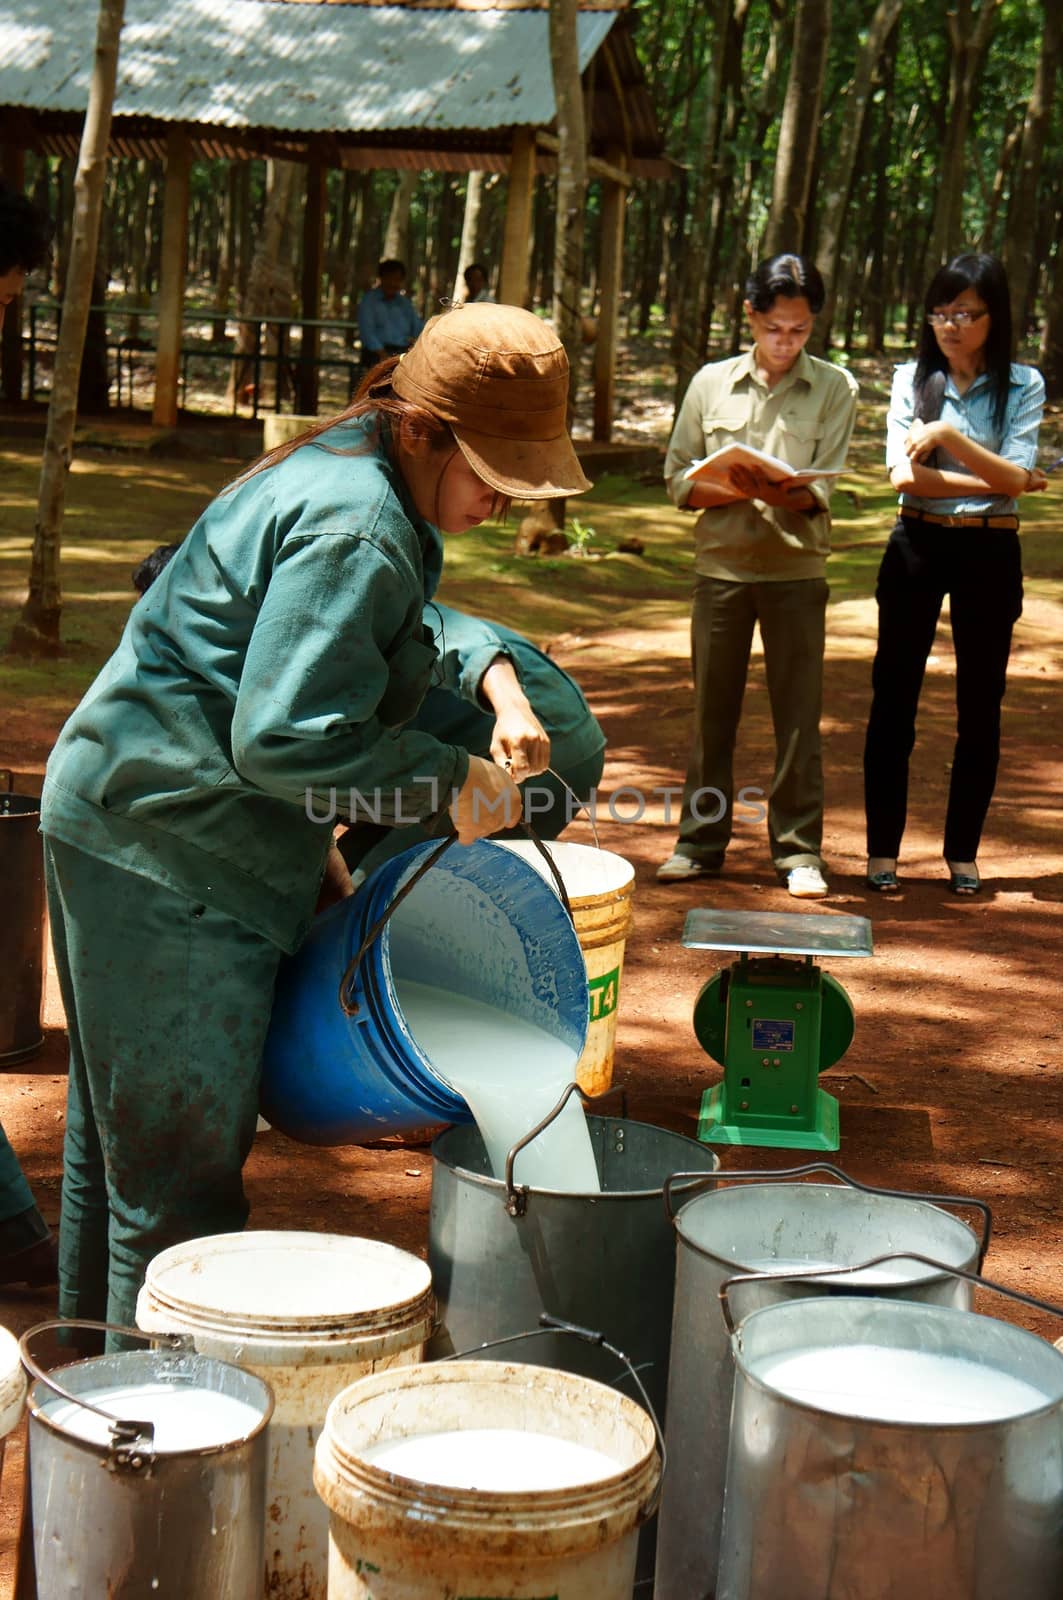 After collect rubber latex, they move them to concentration area and weigh them. Binh Phuoc,Viet Nam-  May 9, 2013